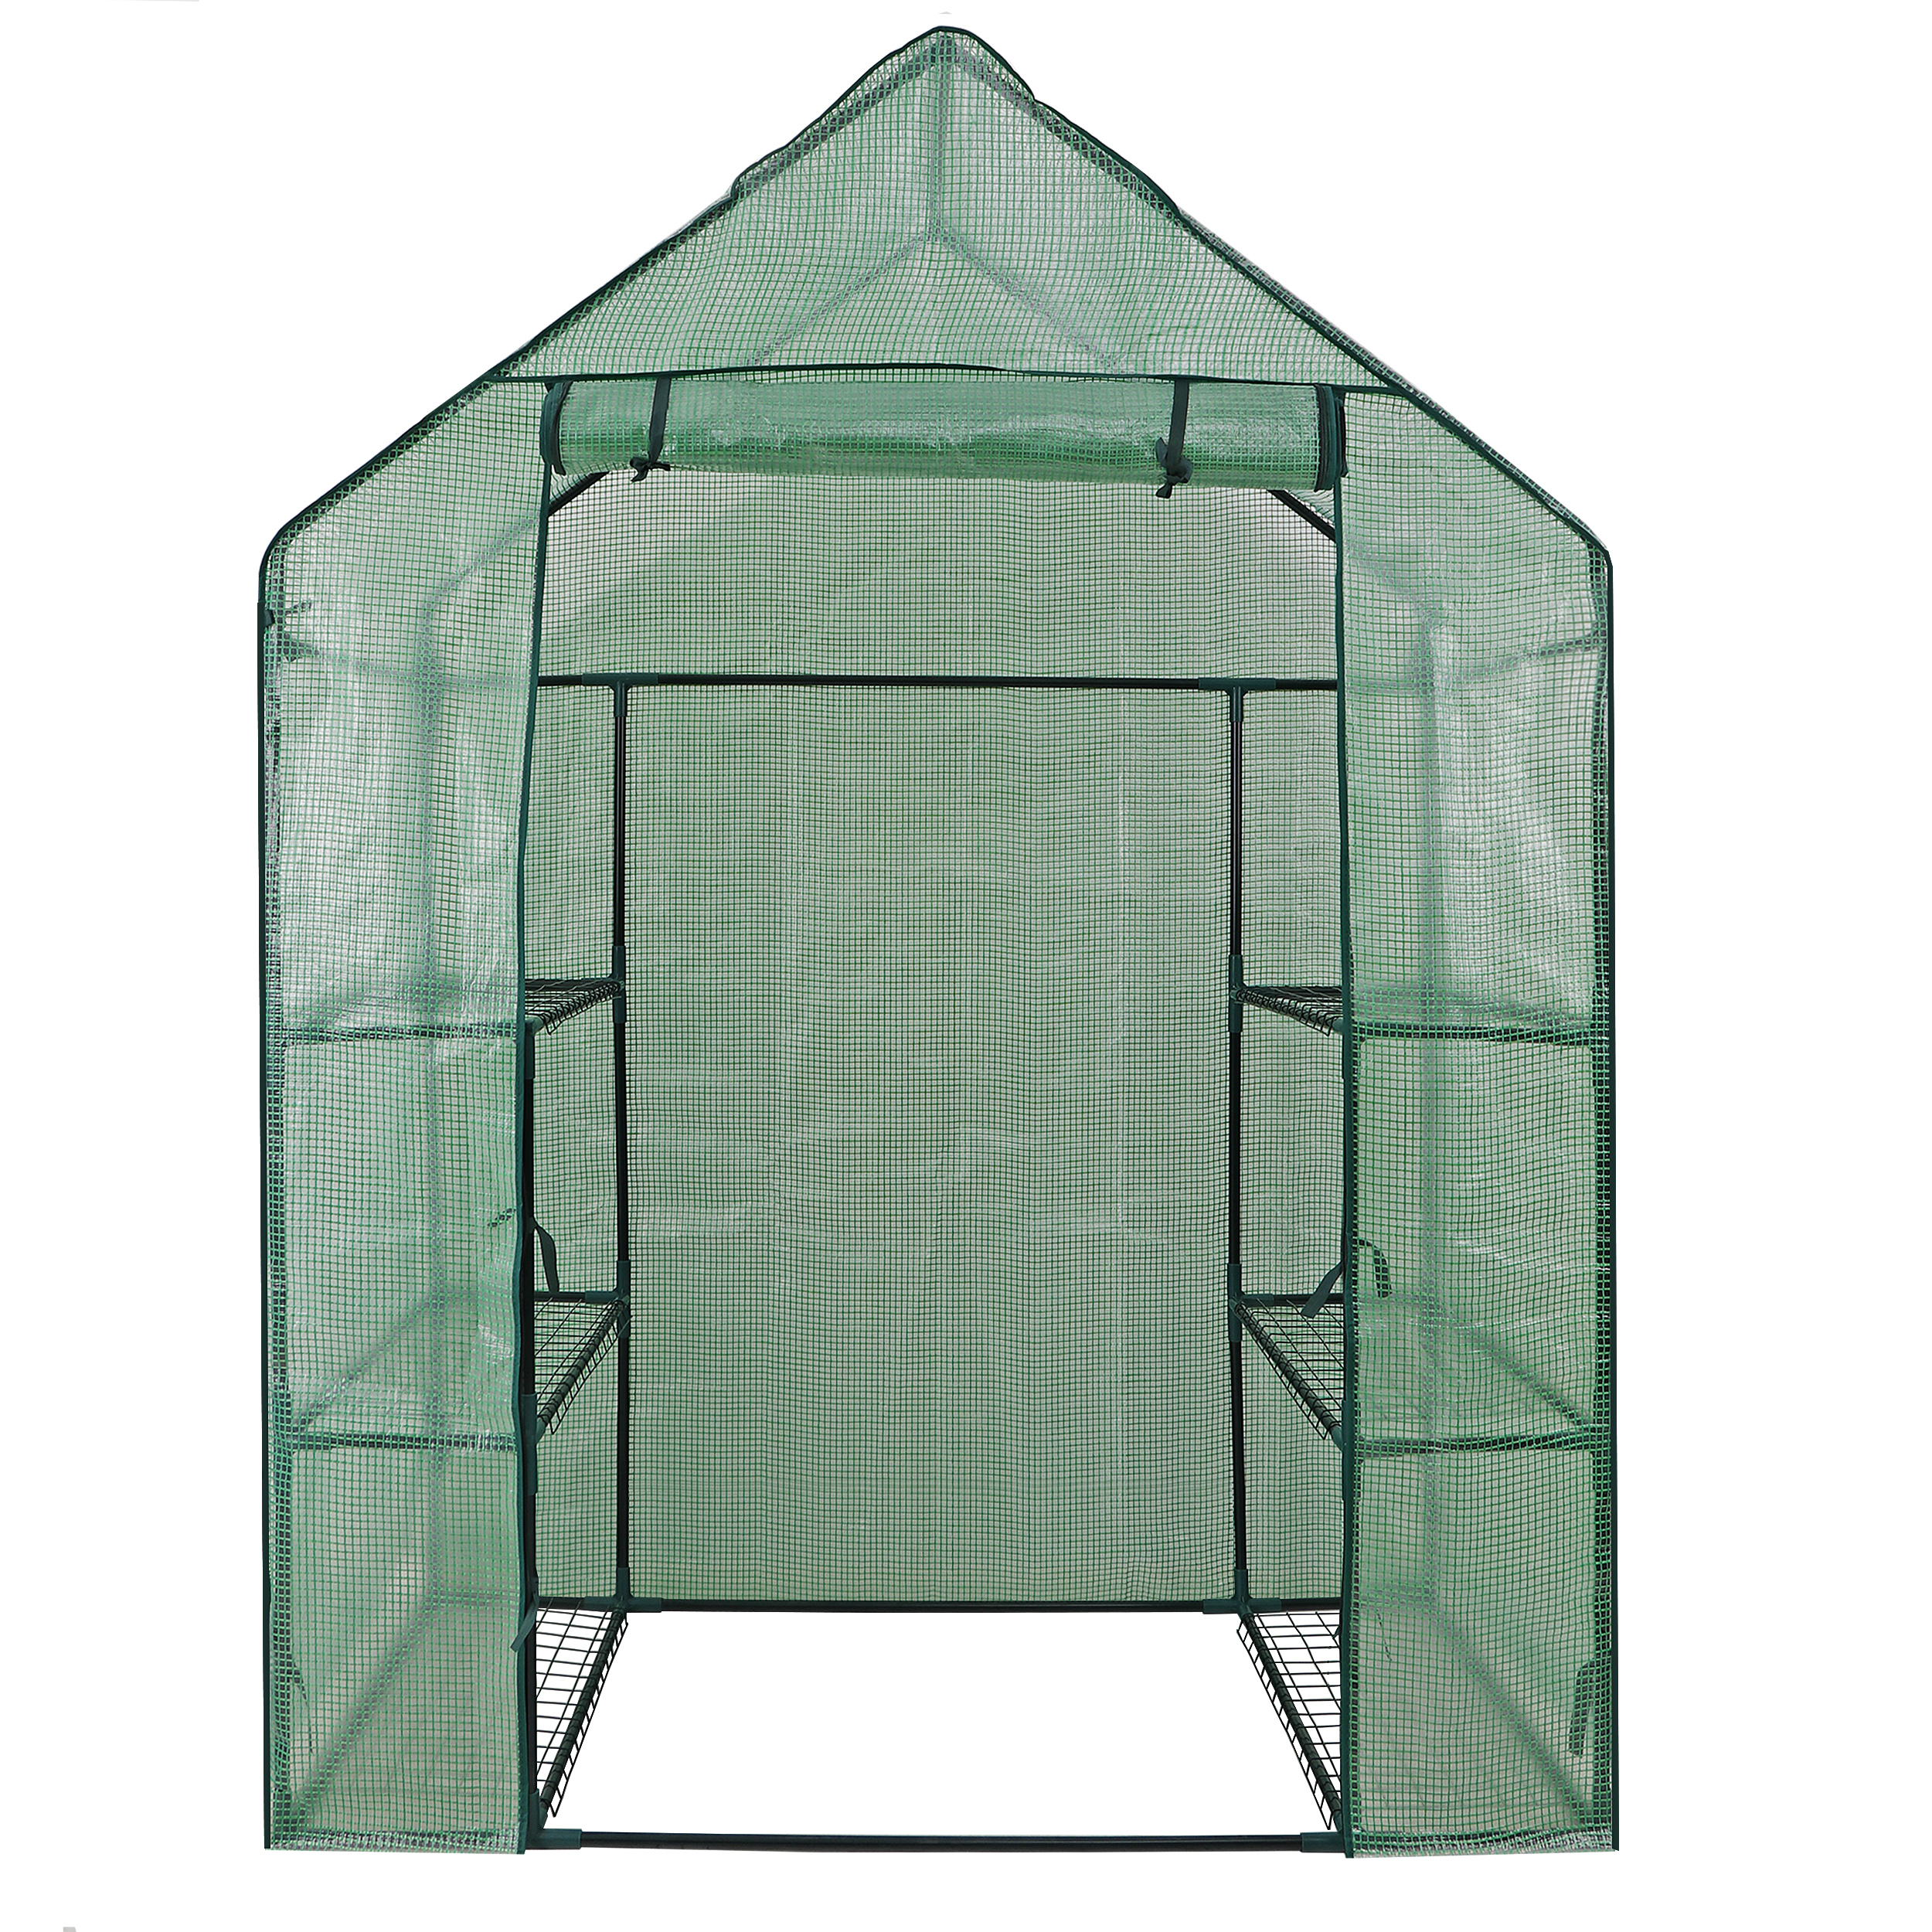 ZENY Mini Walk-in Green House Garden 3 Tier 6 Shelves Movable Plant Greenhouse 55.9 x 28.3 x 75.6" - image 1 of 7